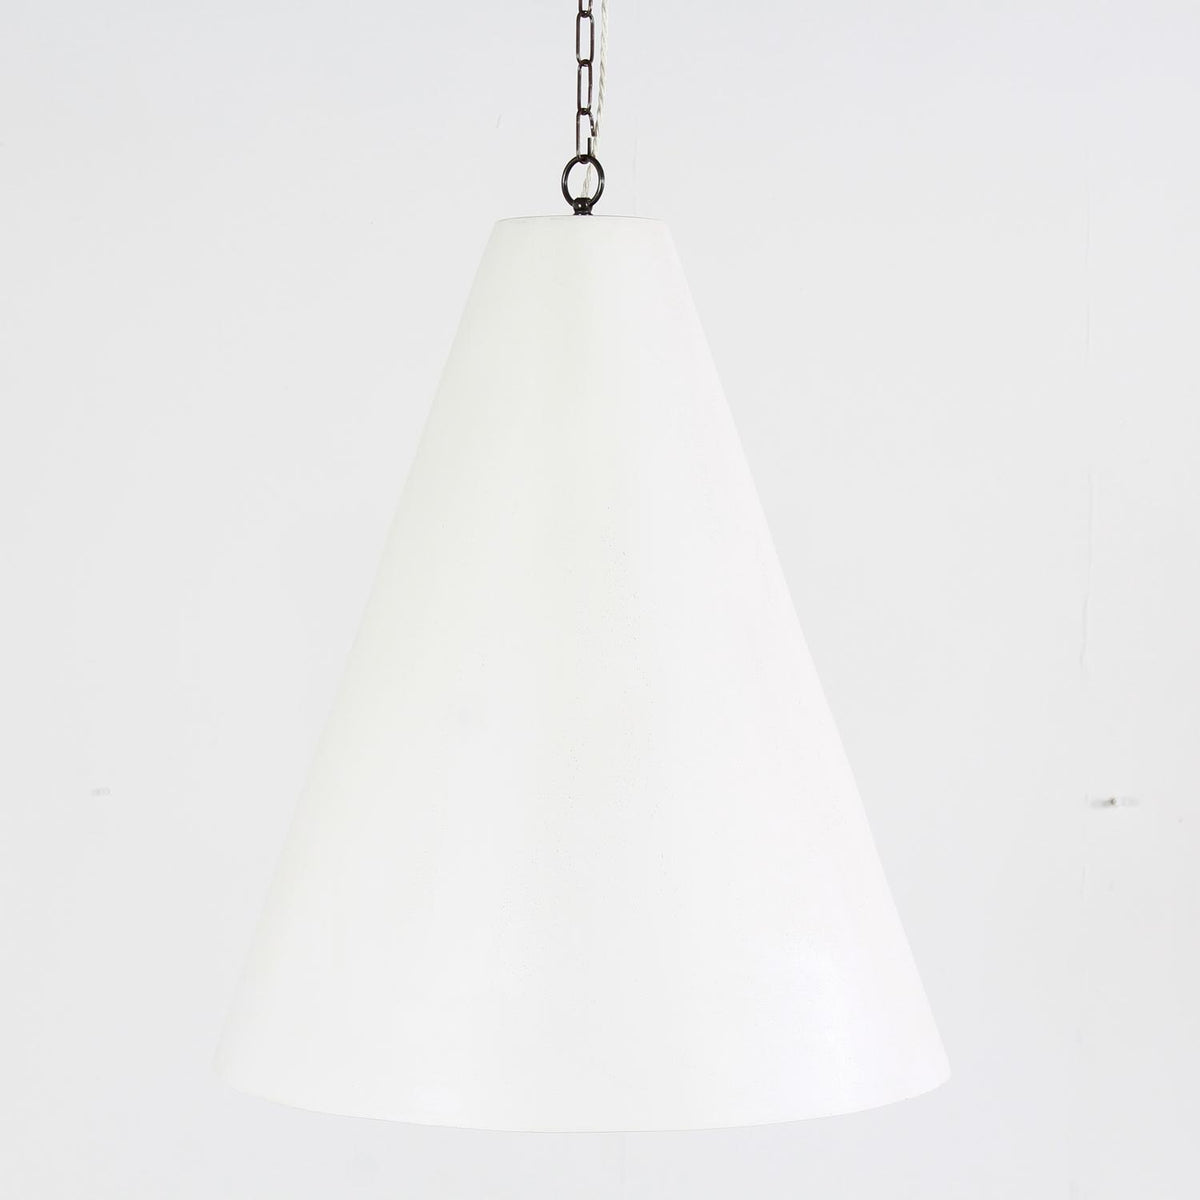 A VERY UNIQUE STRIKING HANDMADE  XL CONICAL PLASTER  HANGING PENDANT